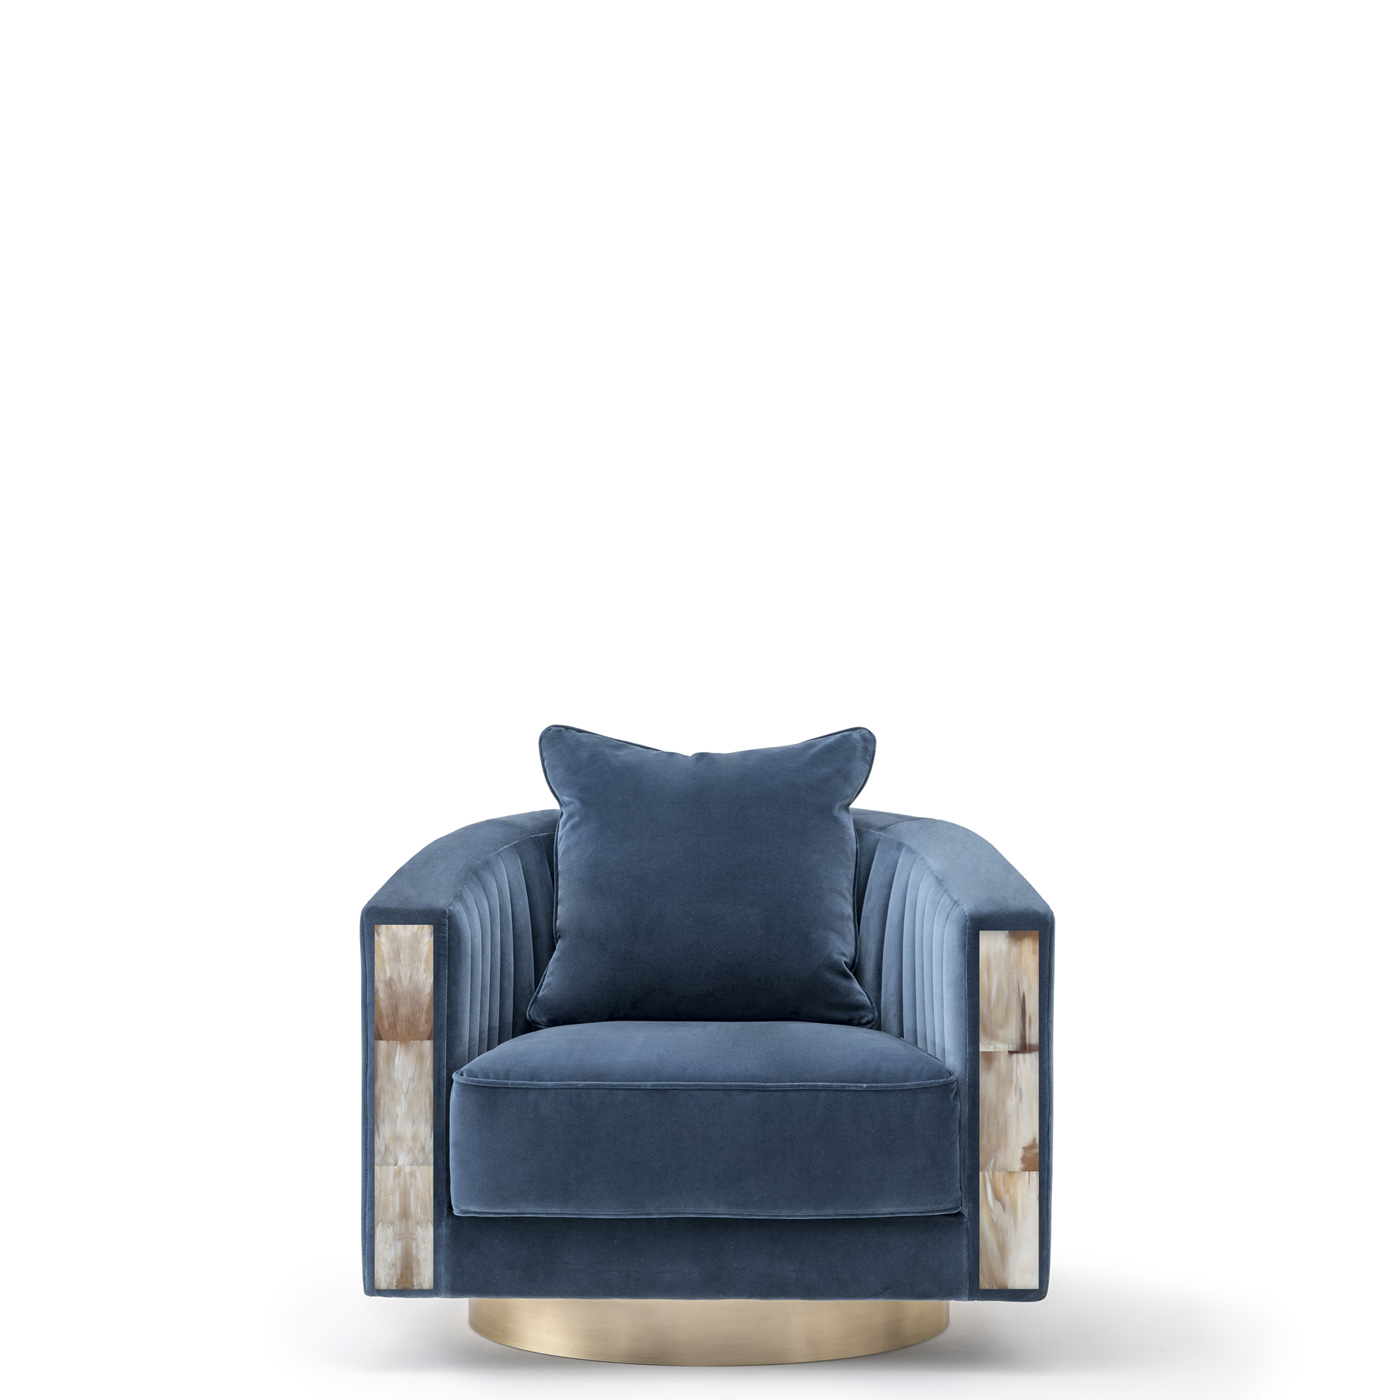 Sofas and seats - Rachele armchair with details in horn mod. 6041 - Arcahorn